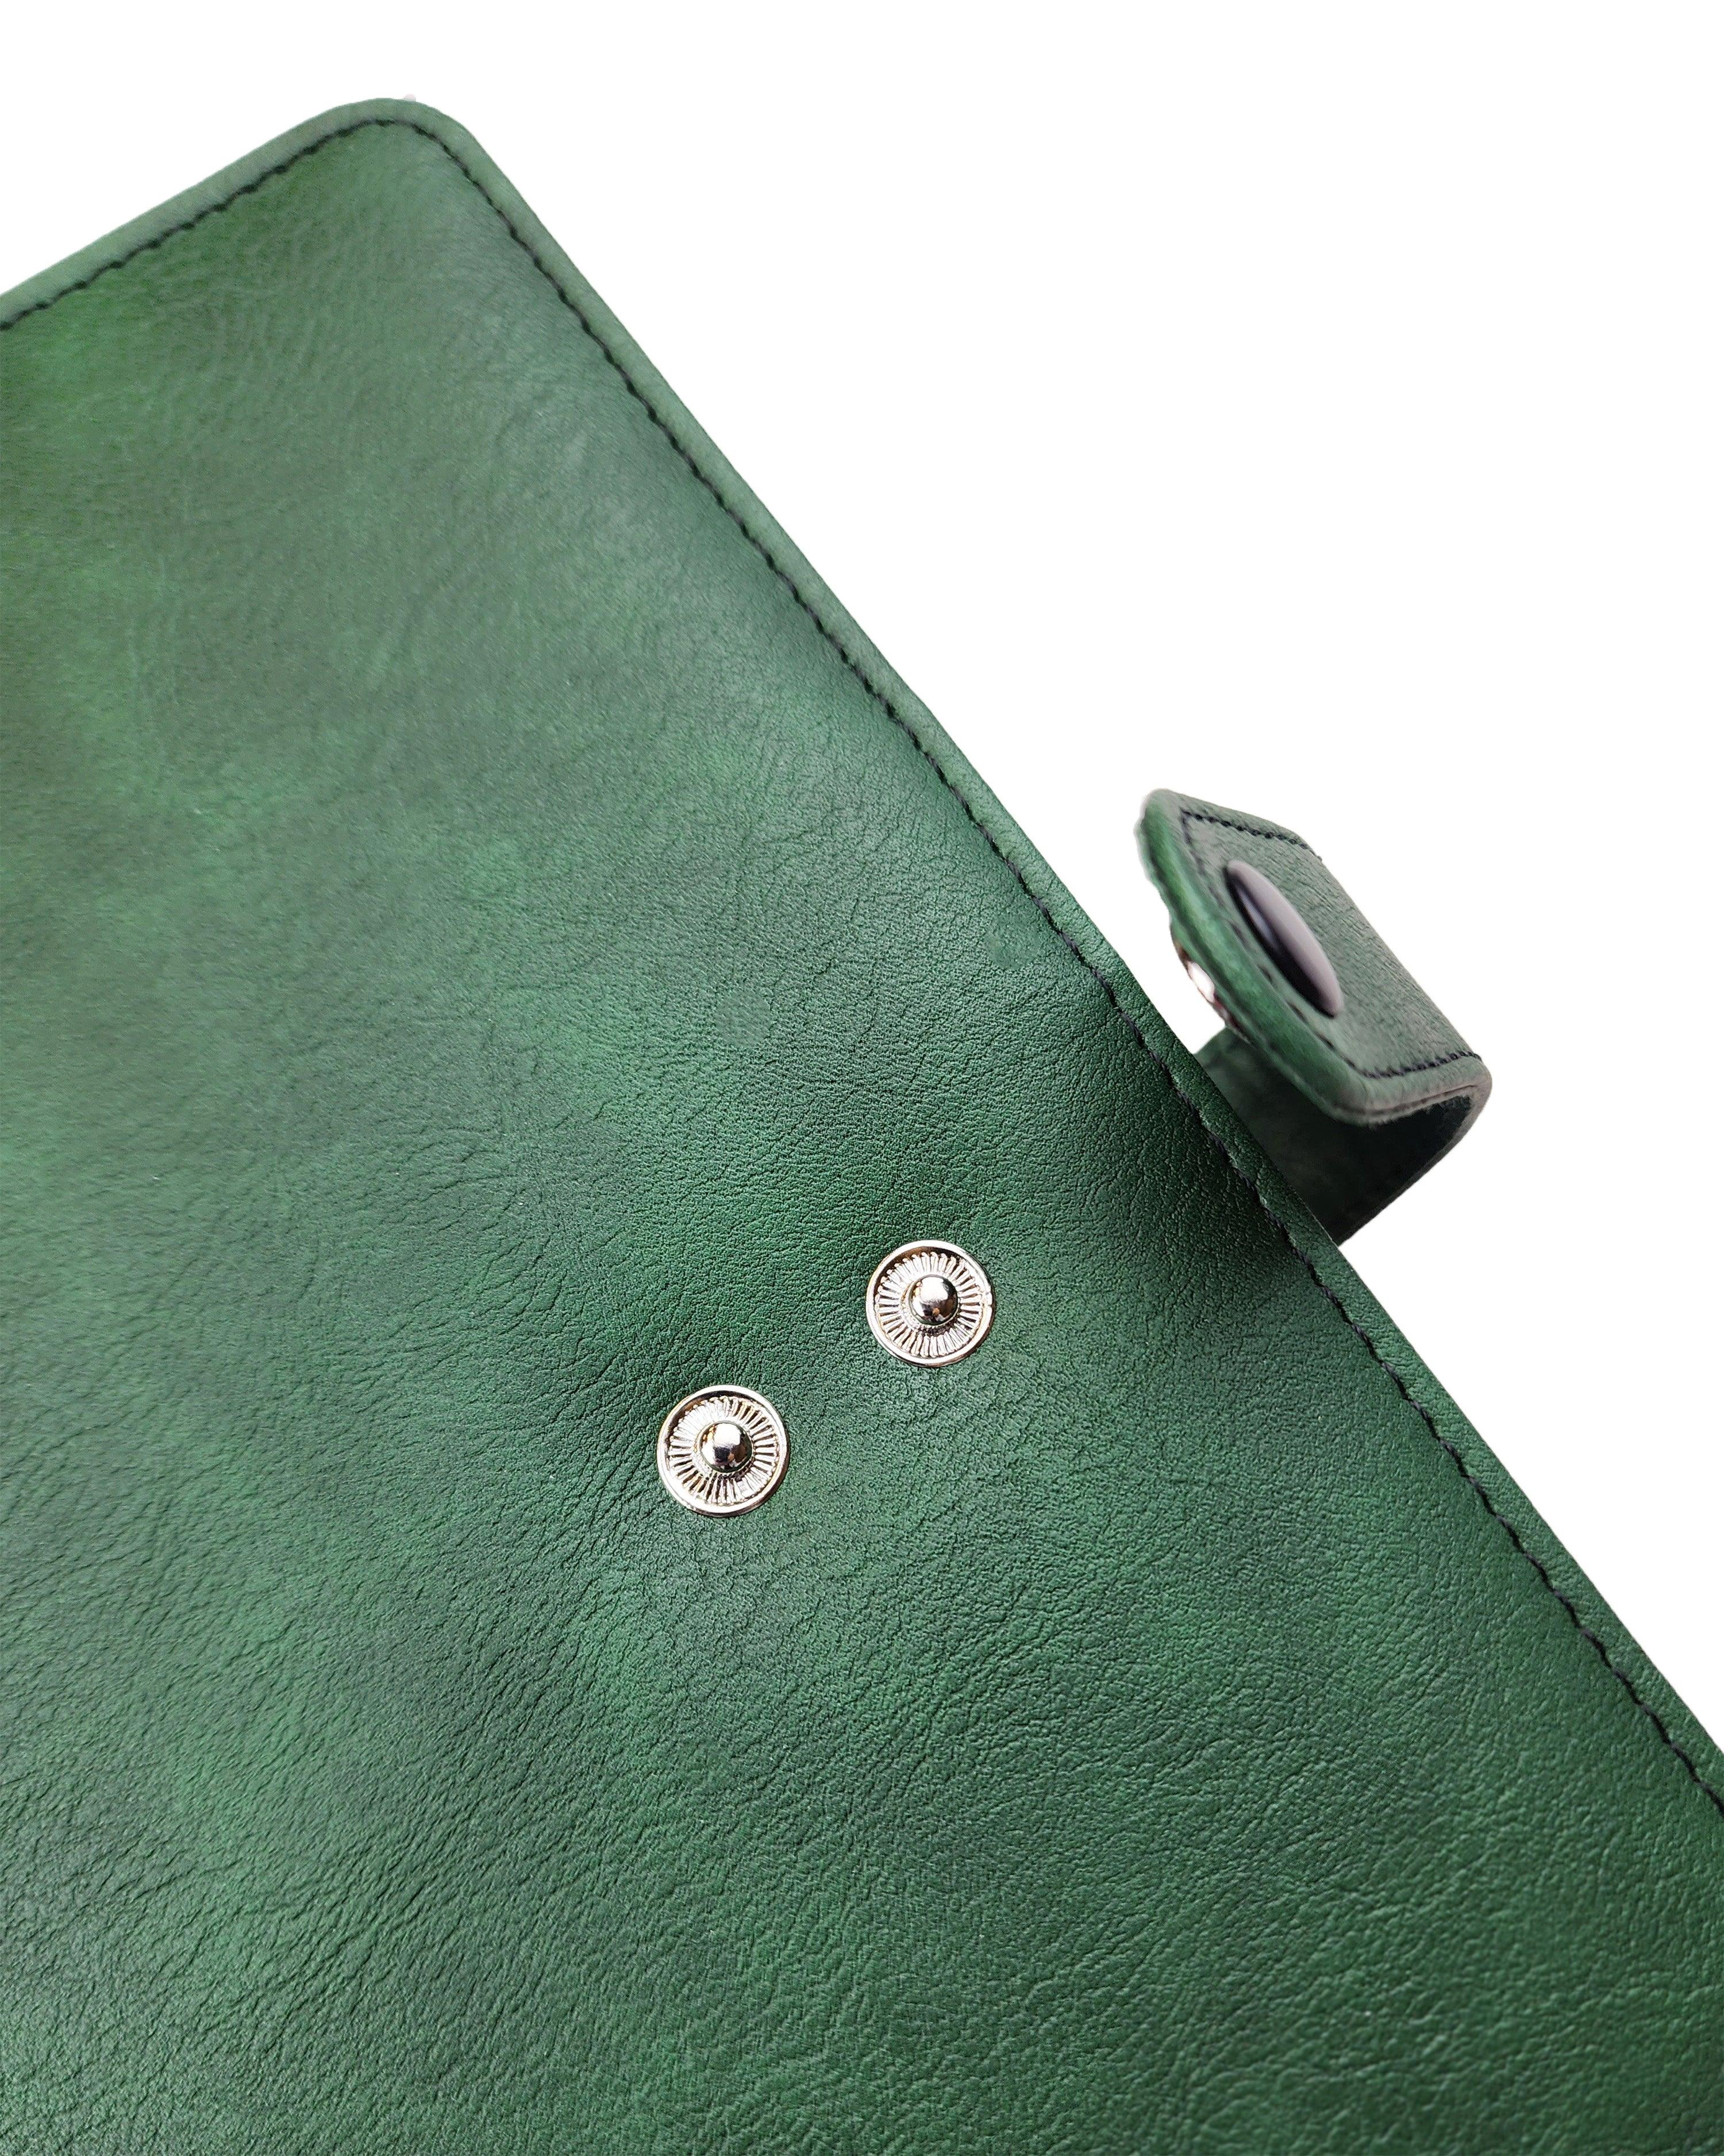 Green Wrap-around Vegan Leather Planner Cover folio for discbound planners by Janes Agenda.